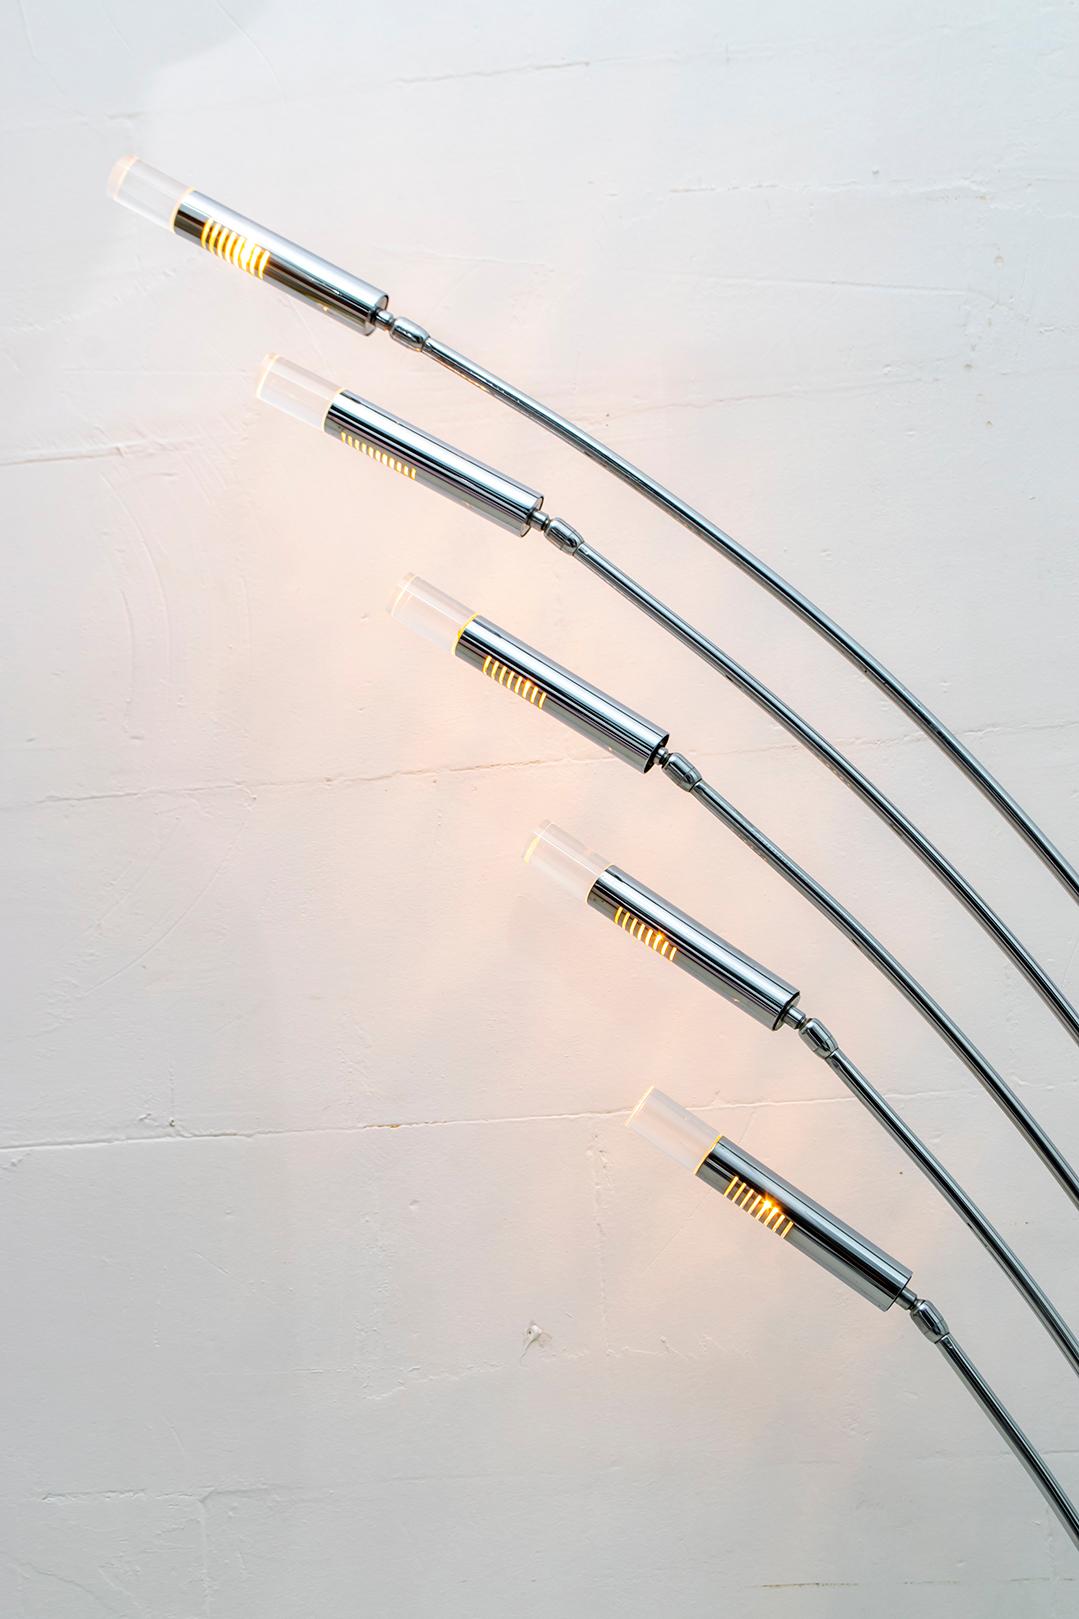 Mid-20th Century Midcentury Italian Arched Floor Lamp 5 Lights Chrome Metal and Lucite, 1960s For Sale